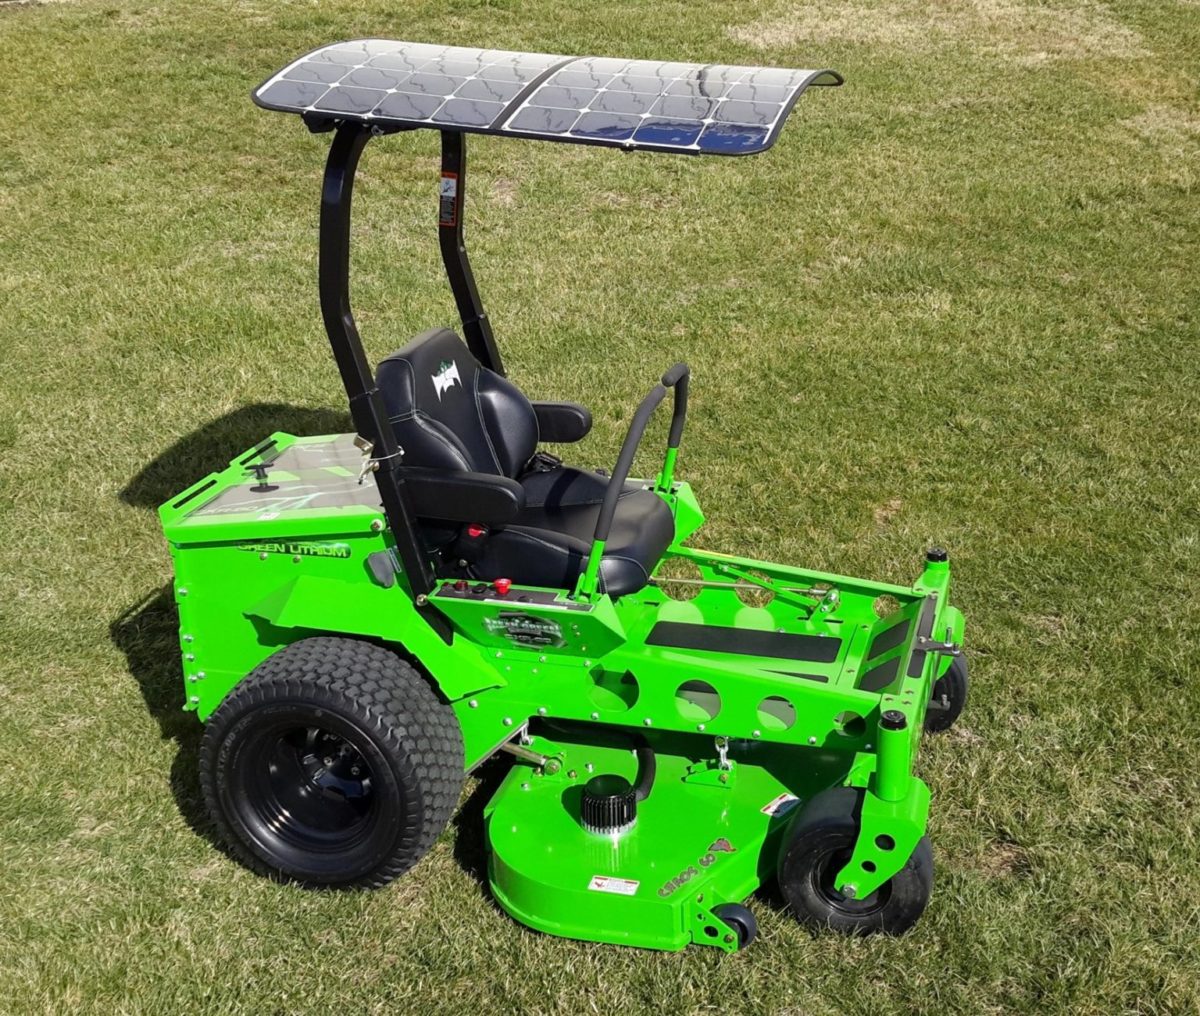 Solar-powered electric lawn mowing